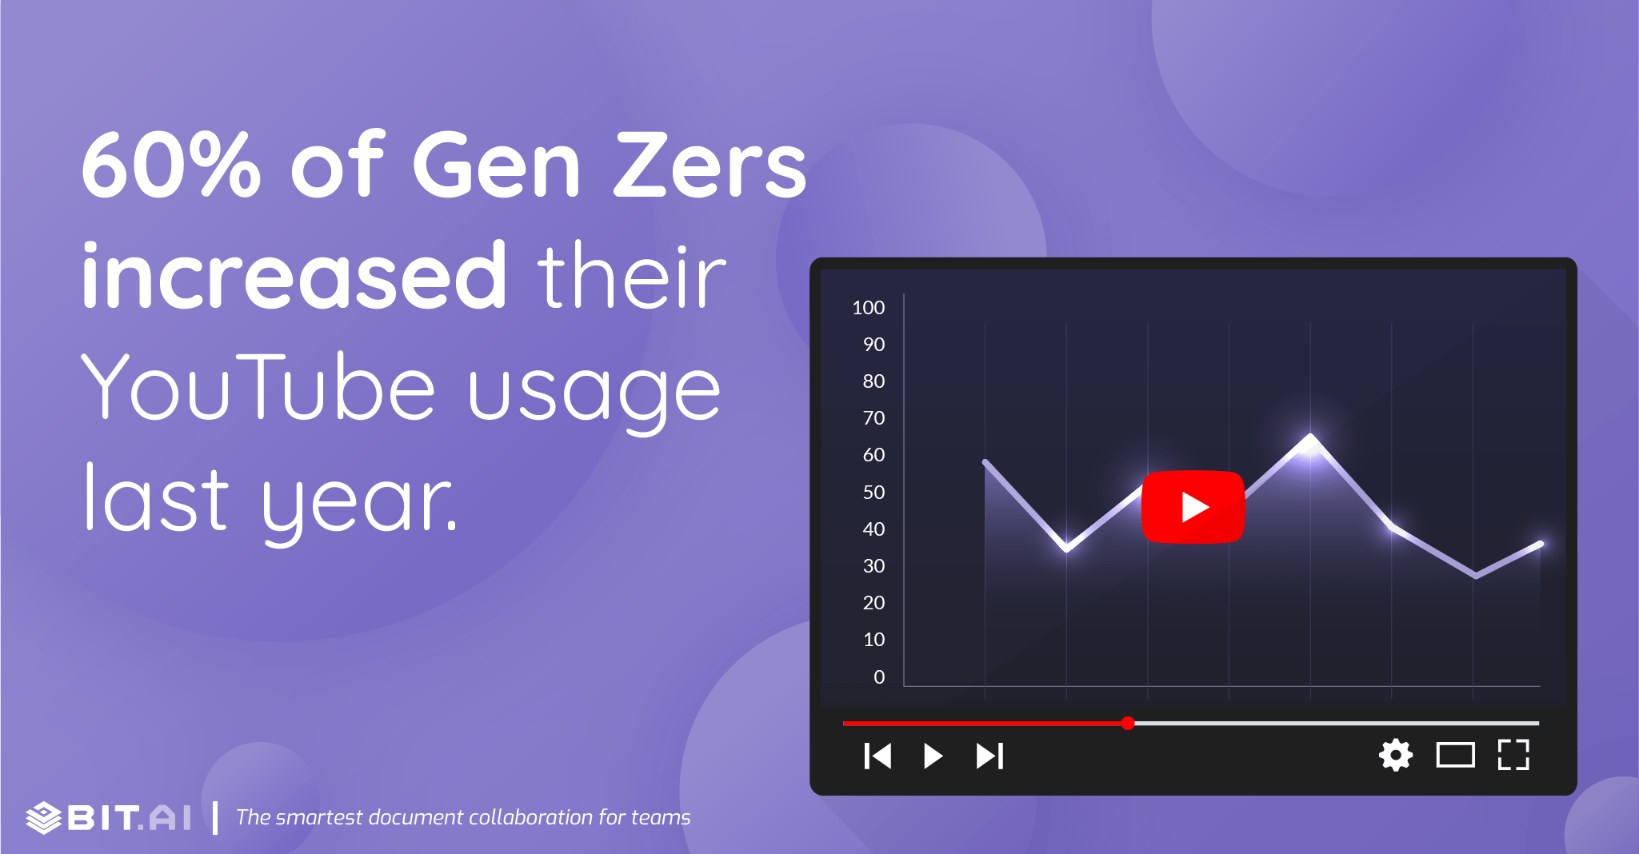 60% of Gen Zers increased their YouTube usage last year.